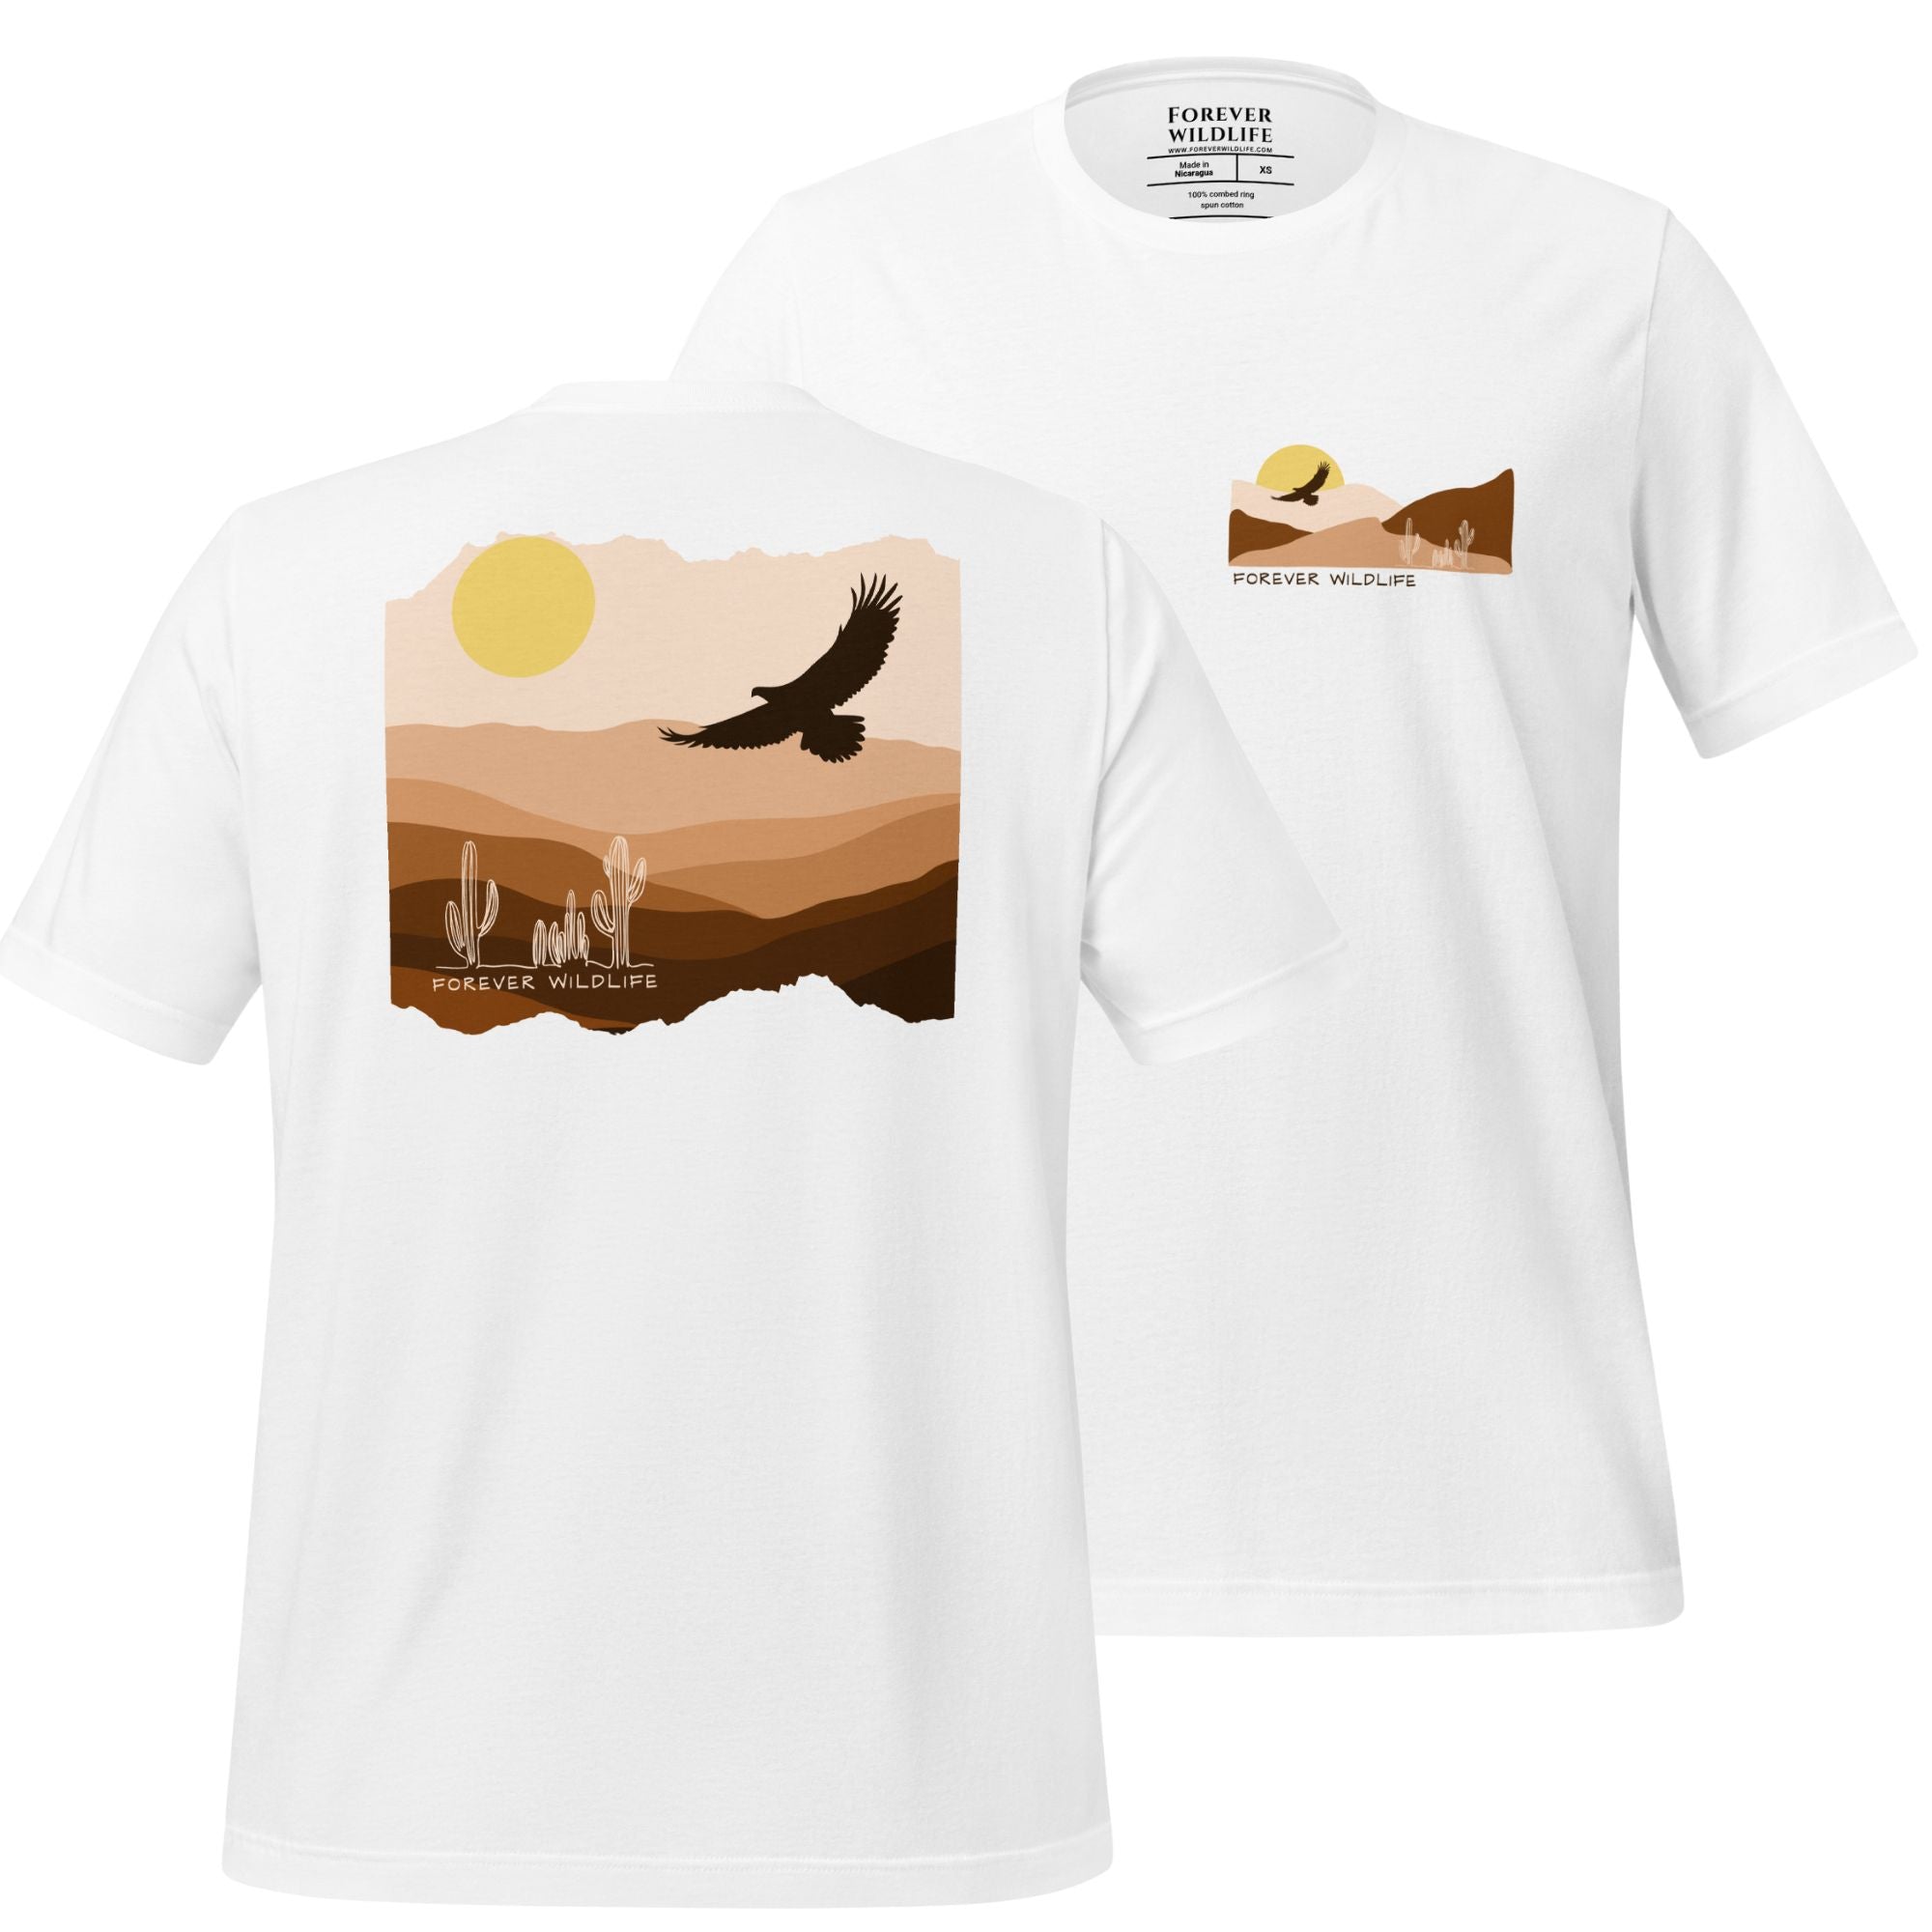 Eagle T-shirt, beautiful white Eagle t-shirt with eagle soaring over the desert part of Wildlife t-shirts & Clothing collection.